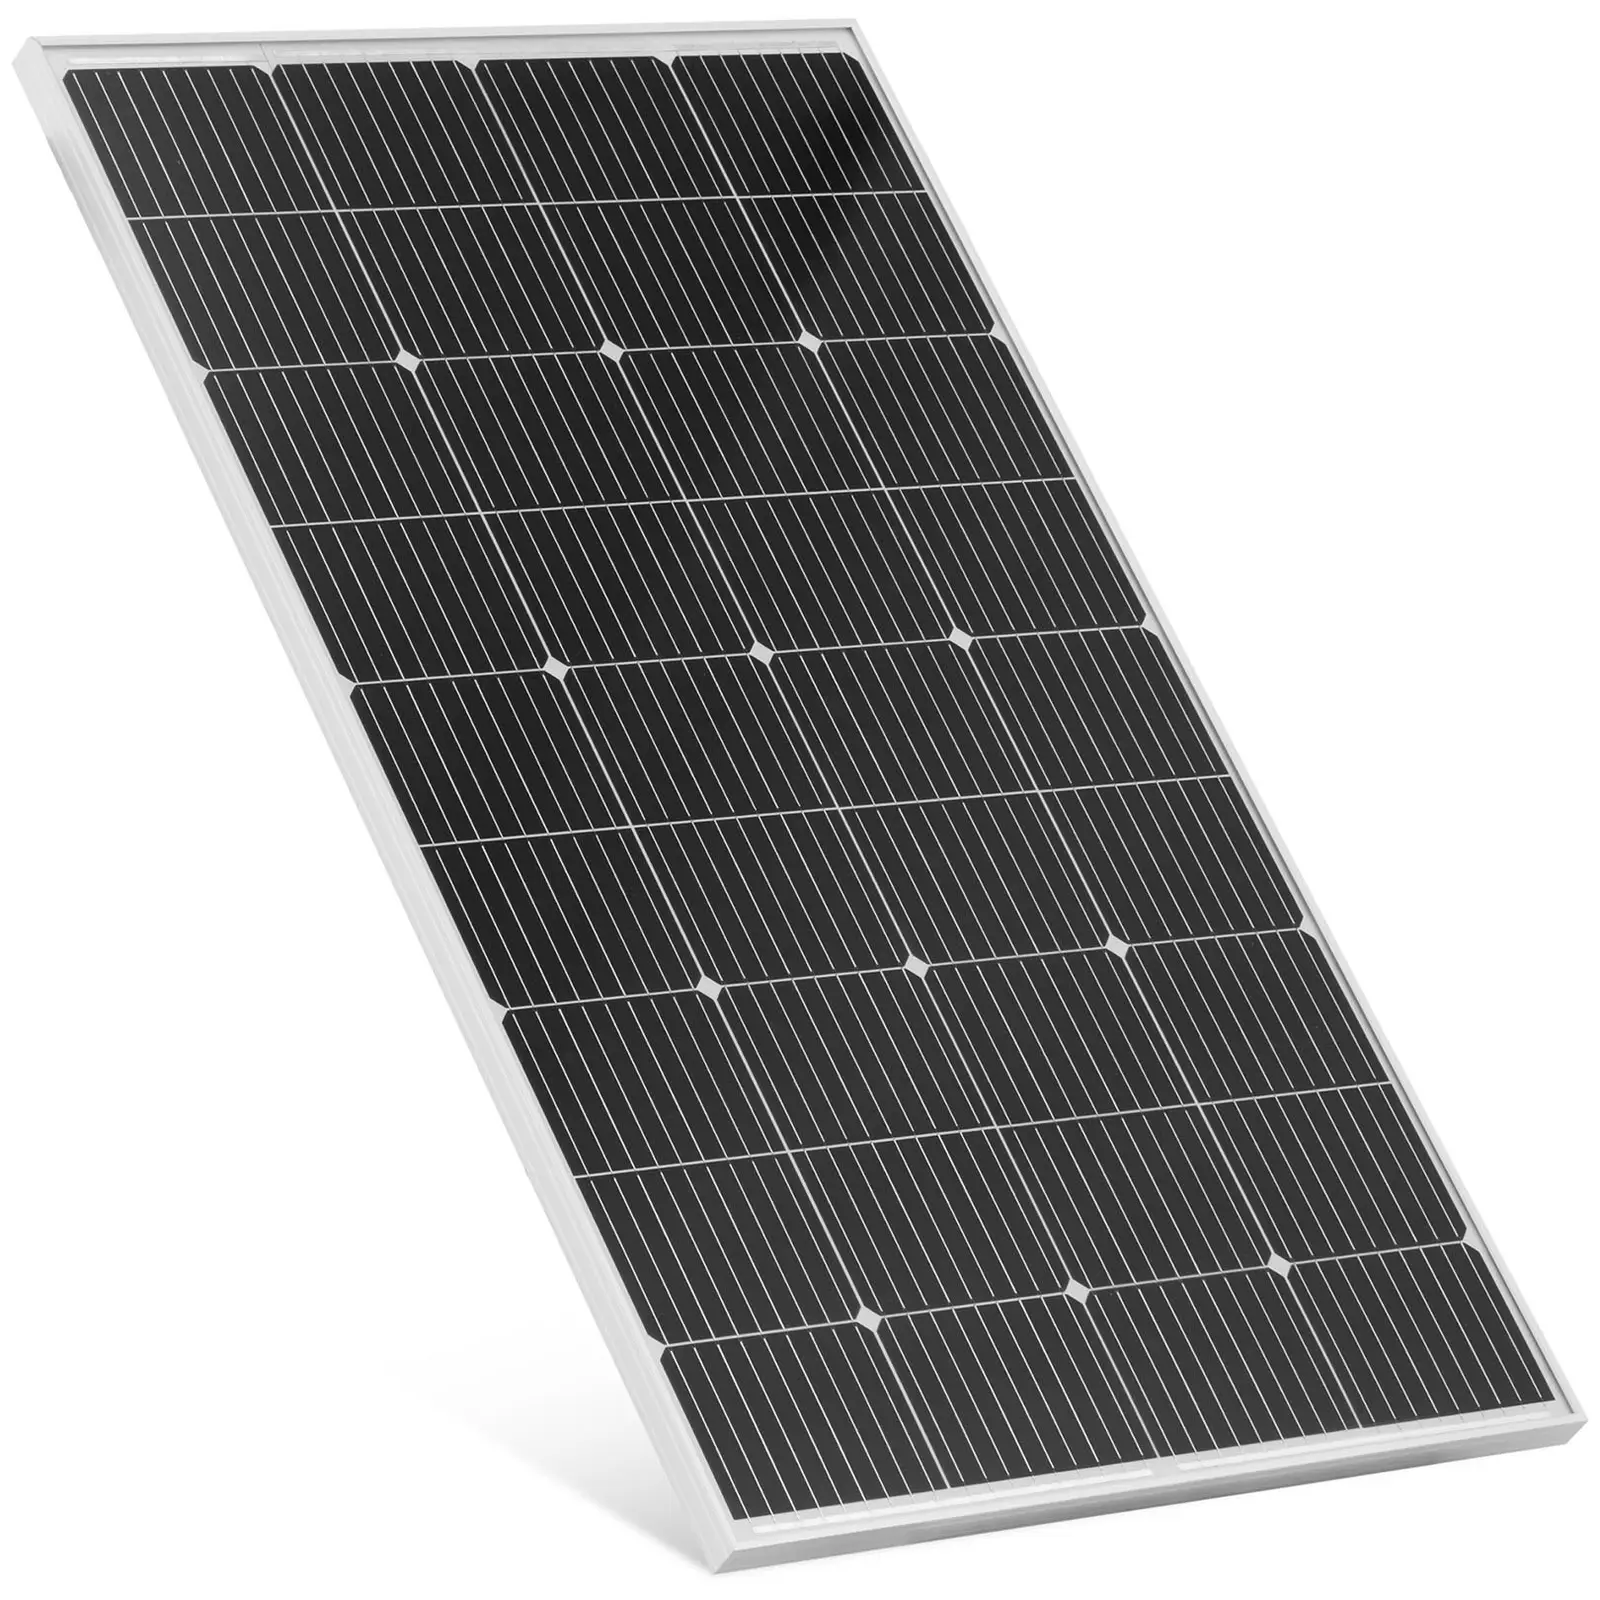 Monocrystalline Solar Panel - 160 W - 22.46 V - with bypass diode